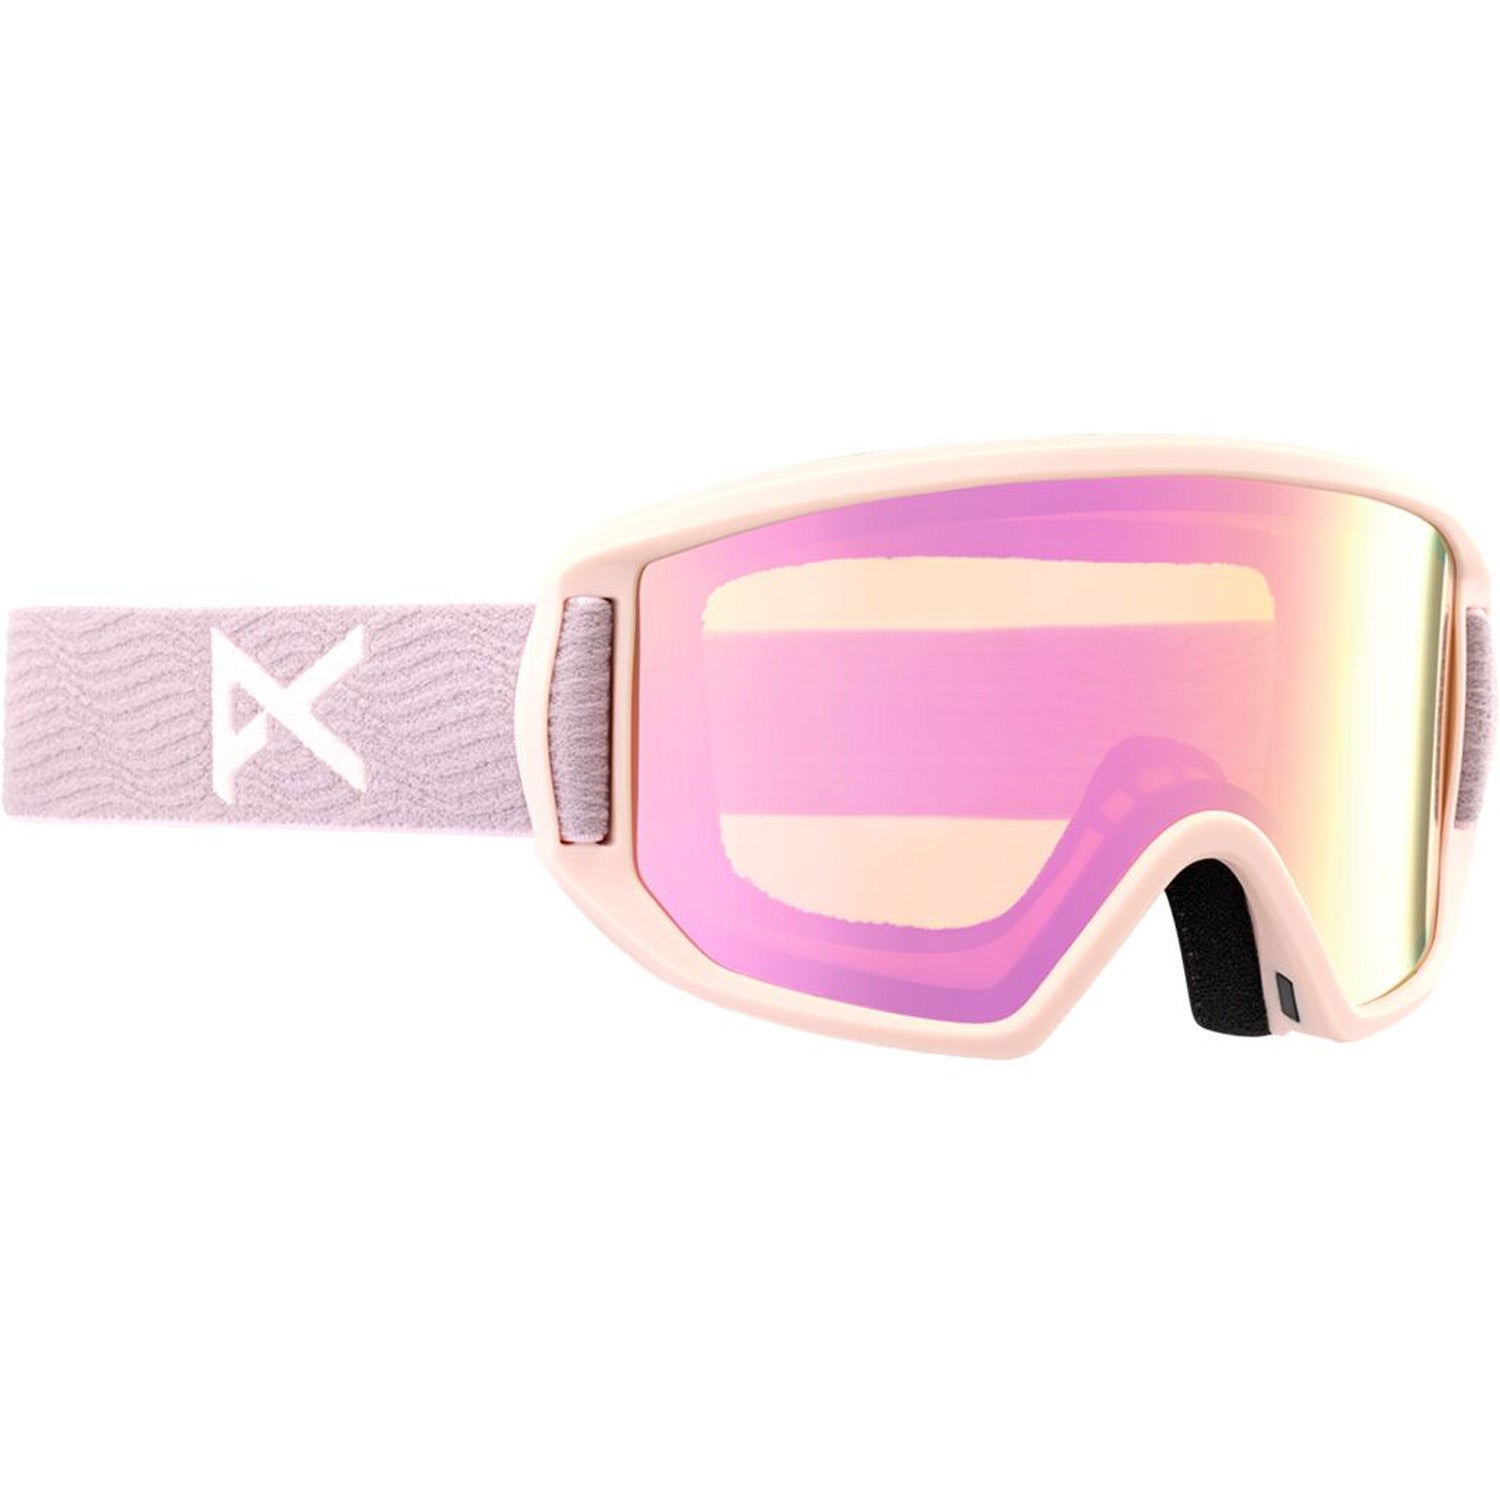 Relapse Jr Snow Goggle